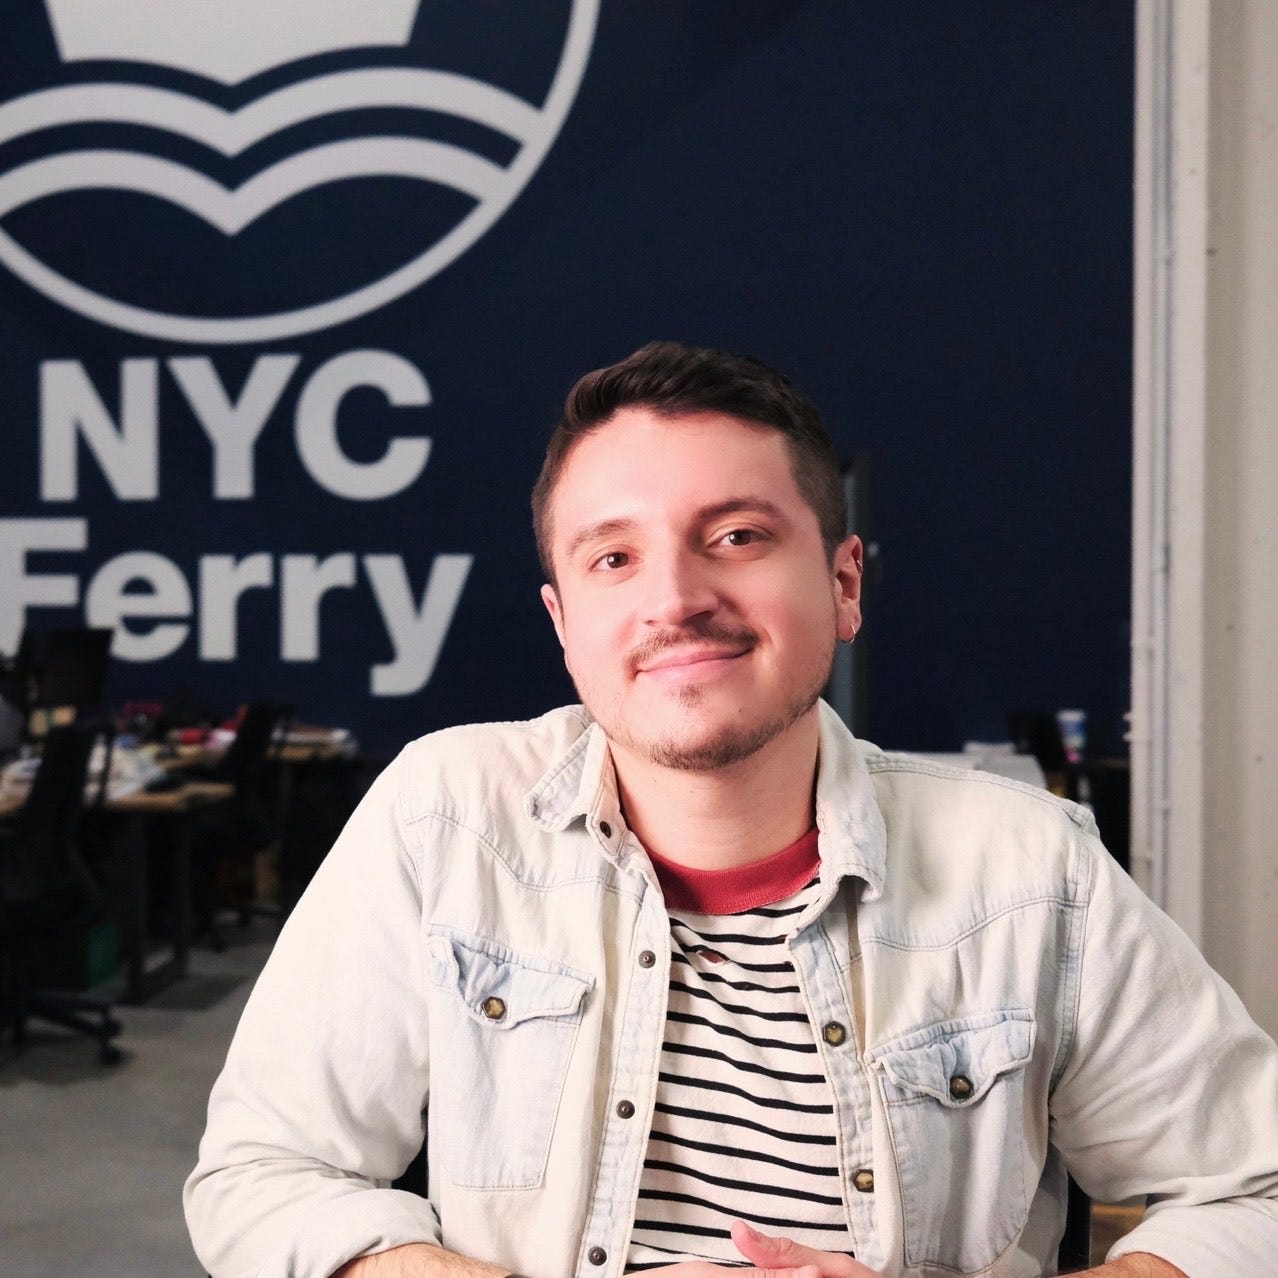 Photo of Franky Ponce in front of an NYC Ferry sign